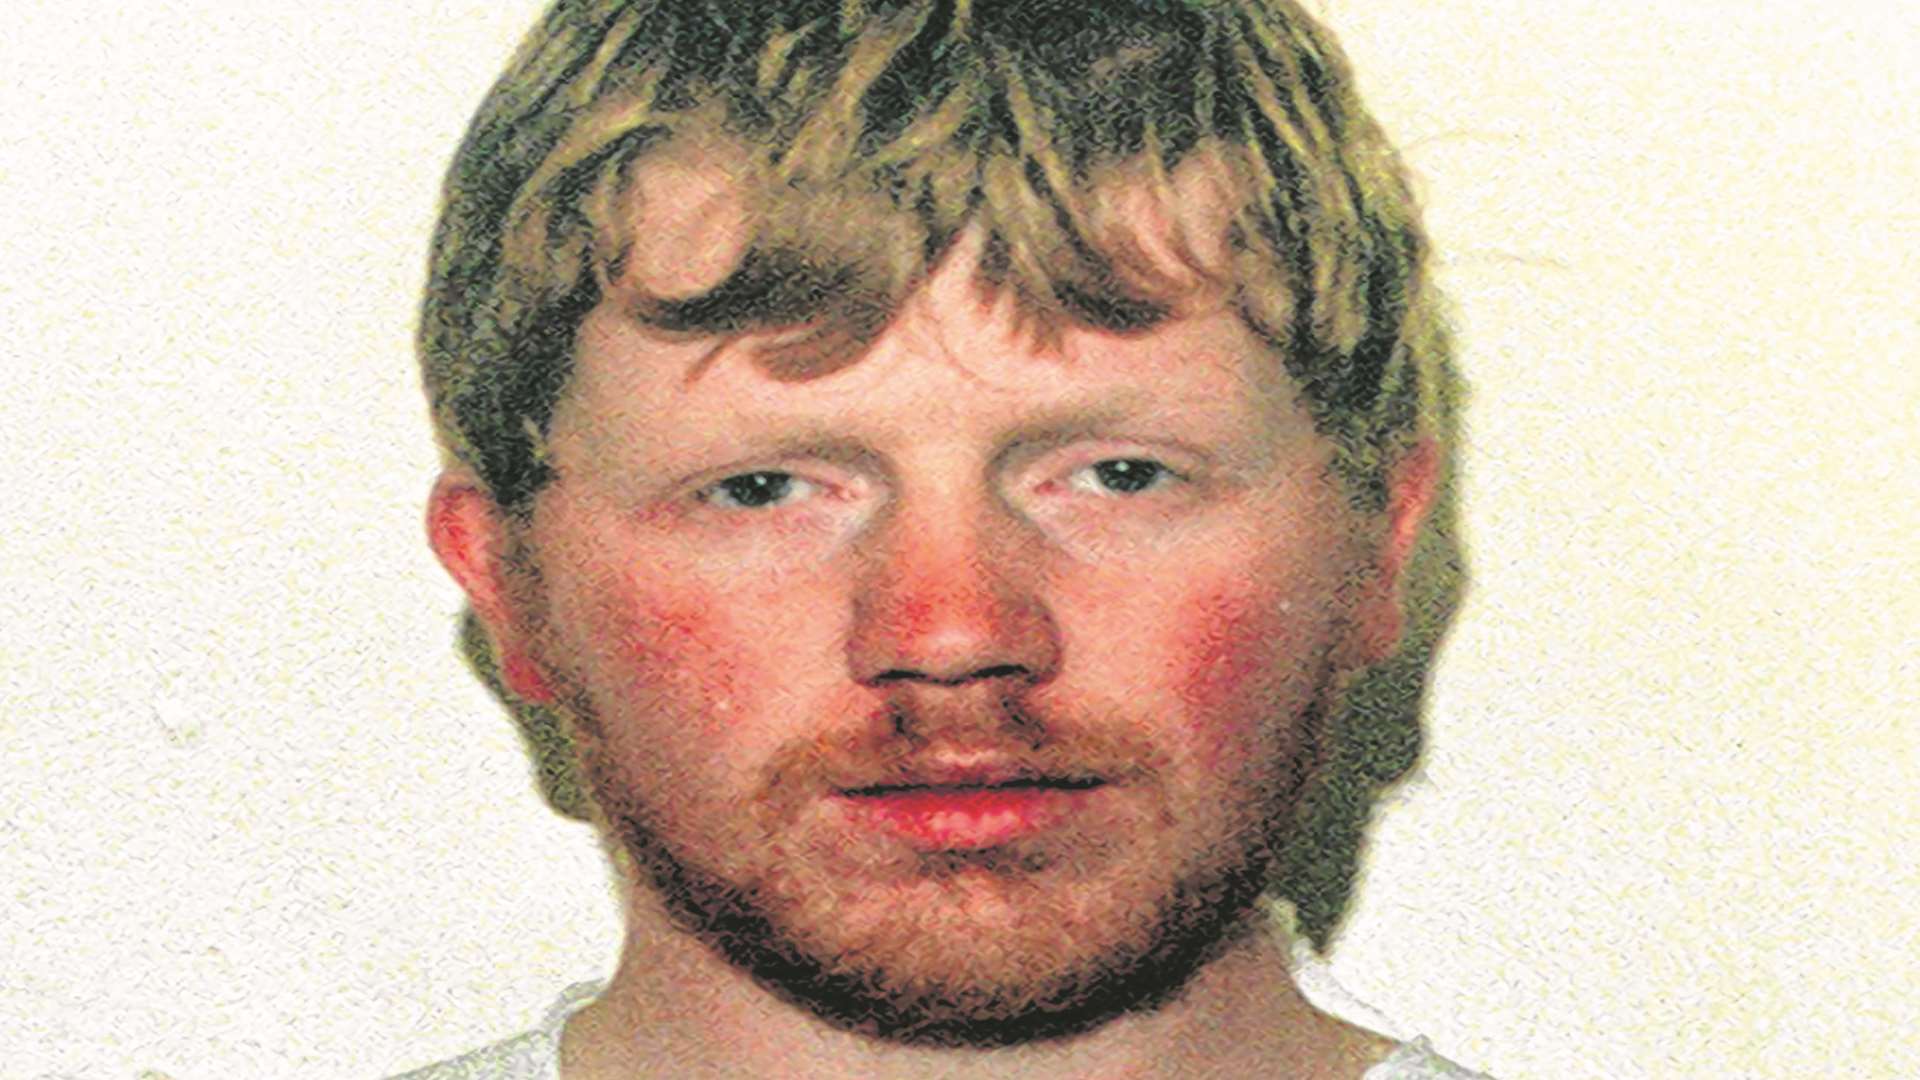 Colin Ash-Smith at the time of his arrest for the knife attack on a woman in Greenhithe in 1995